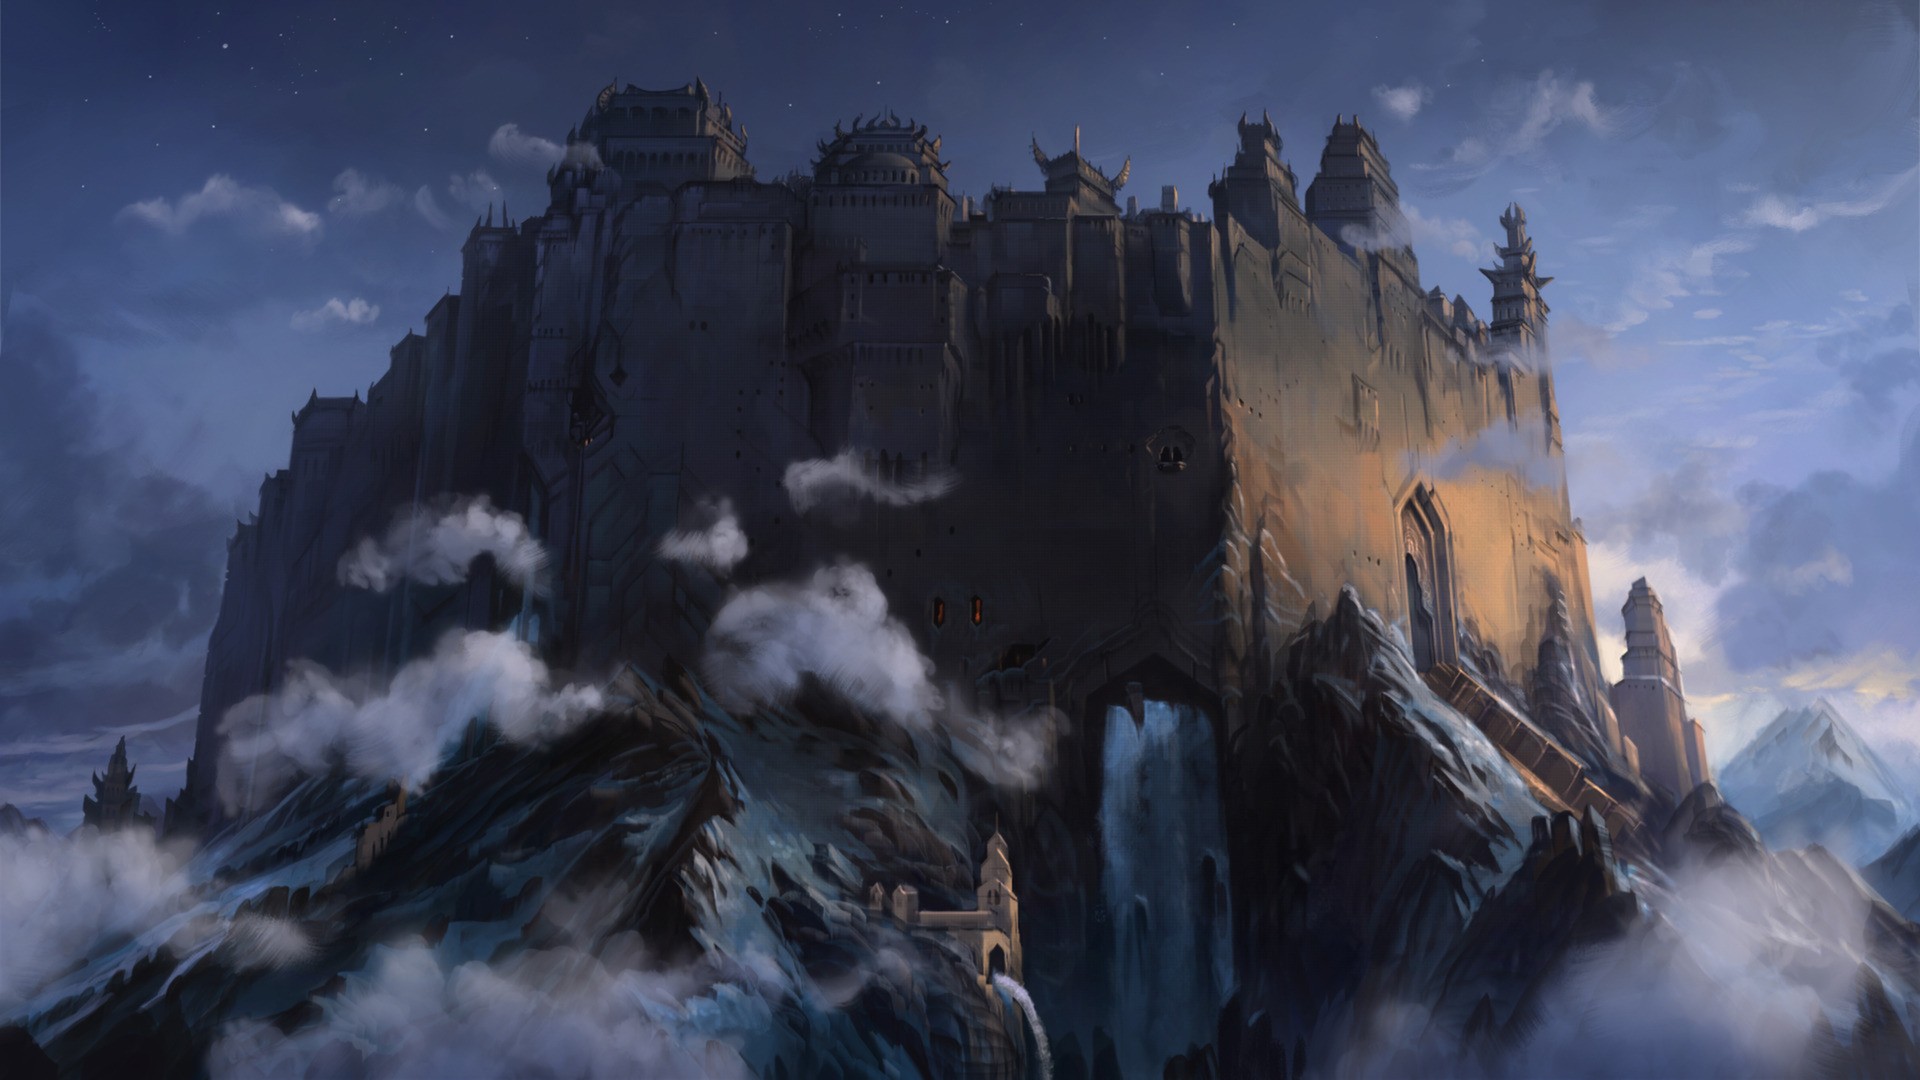 Fantasy Art Artwork Clouds Mountains Forts Castle 1920x1080